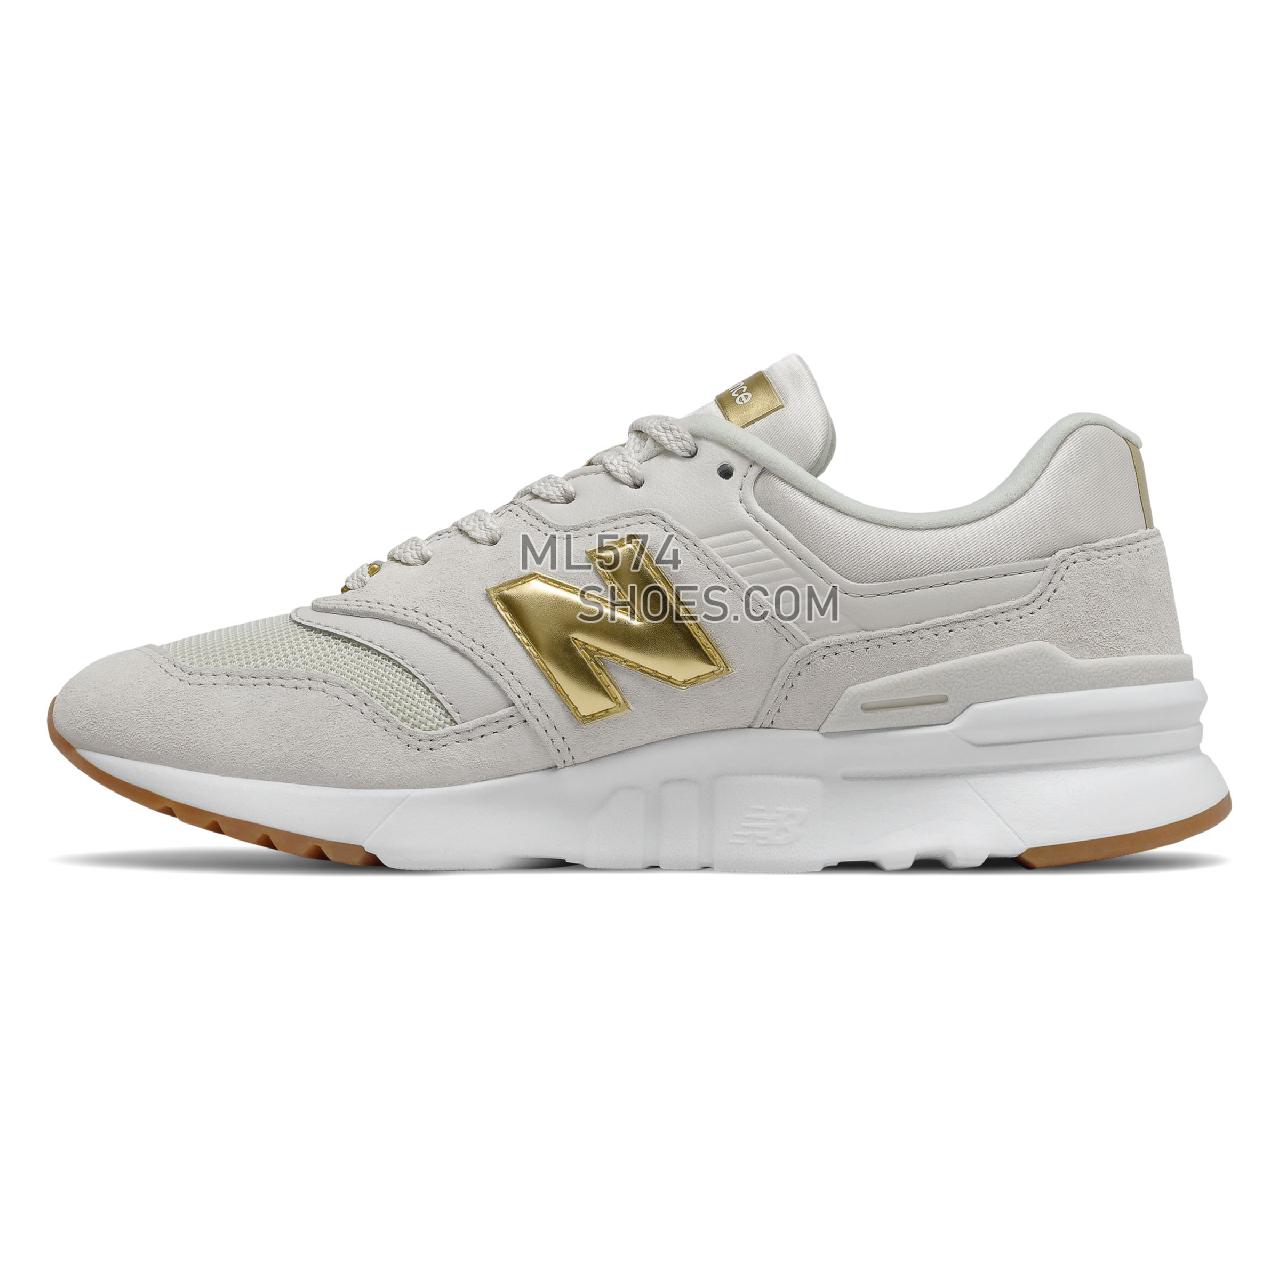 New Balance 997H - Women's Classic Sneakers - Moonbeam with Gold - CW997HAG